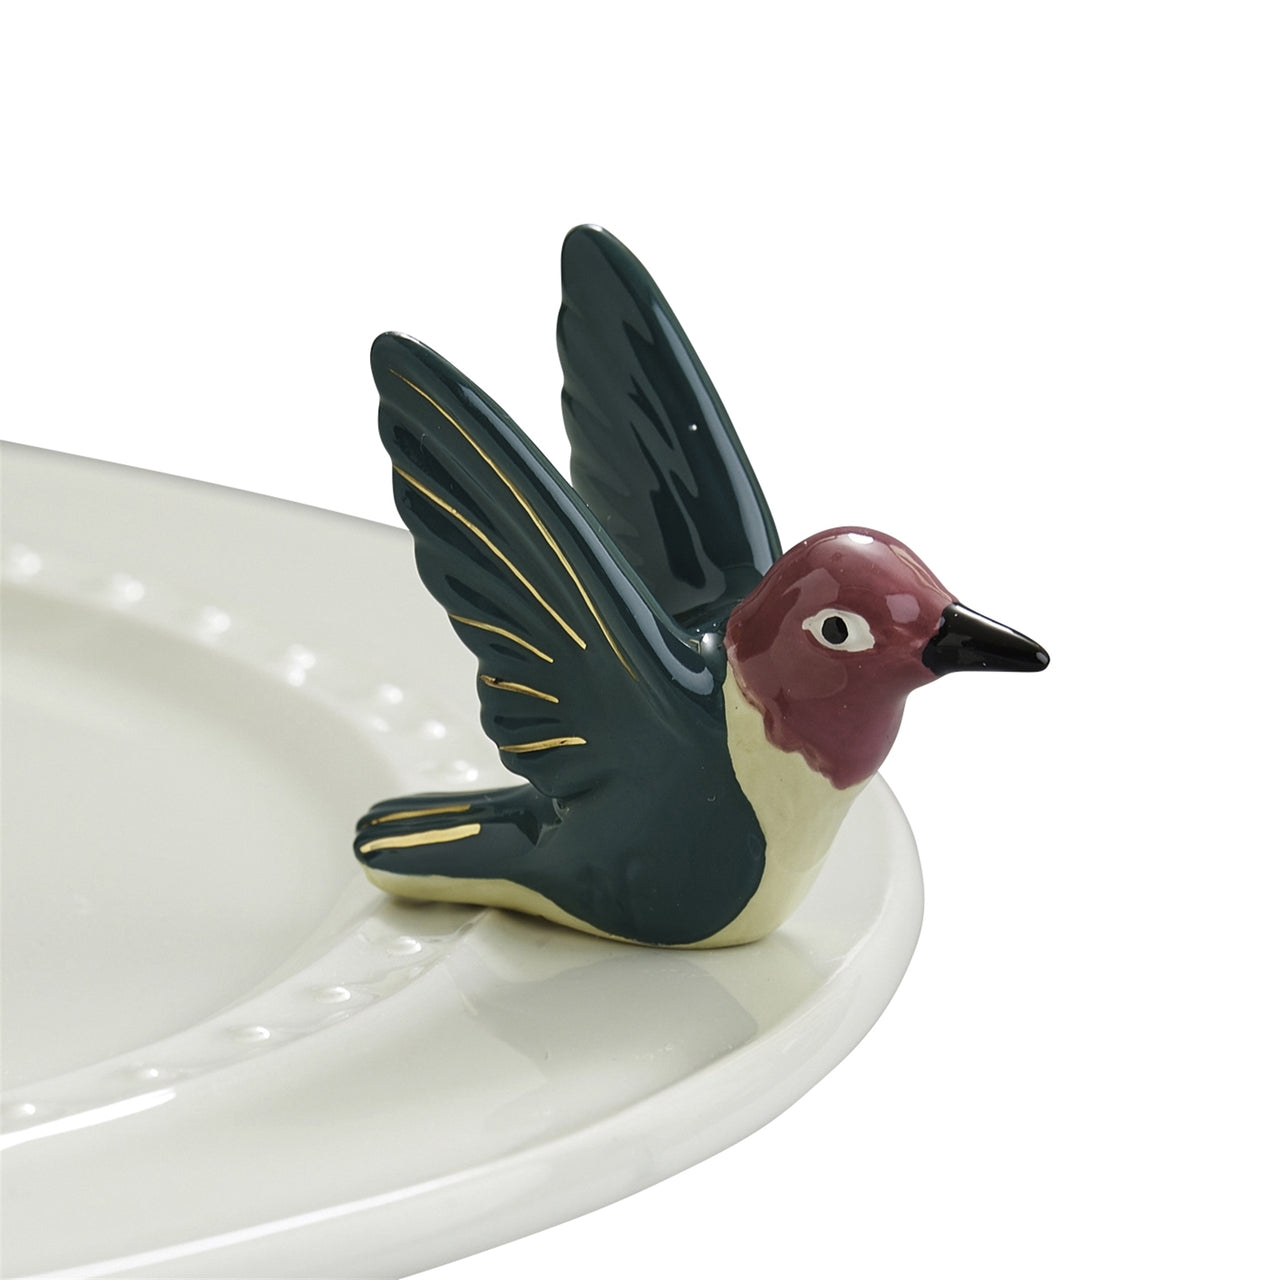 A274 Humm-Dinger mini by Nora Fleming. Green, purple and white hummingbird with gold accents. Shop The Painted Cottage in Edgewater, MD.